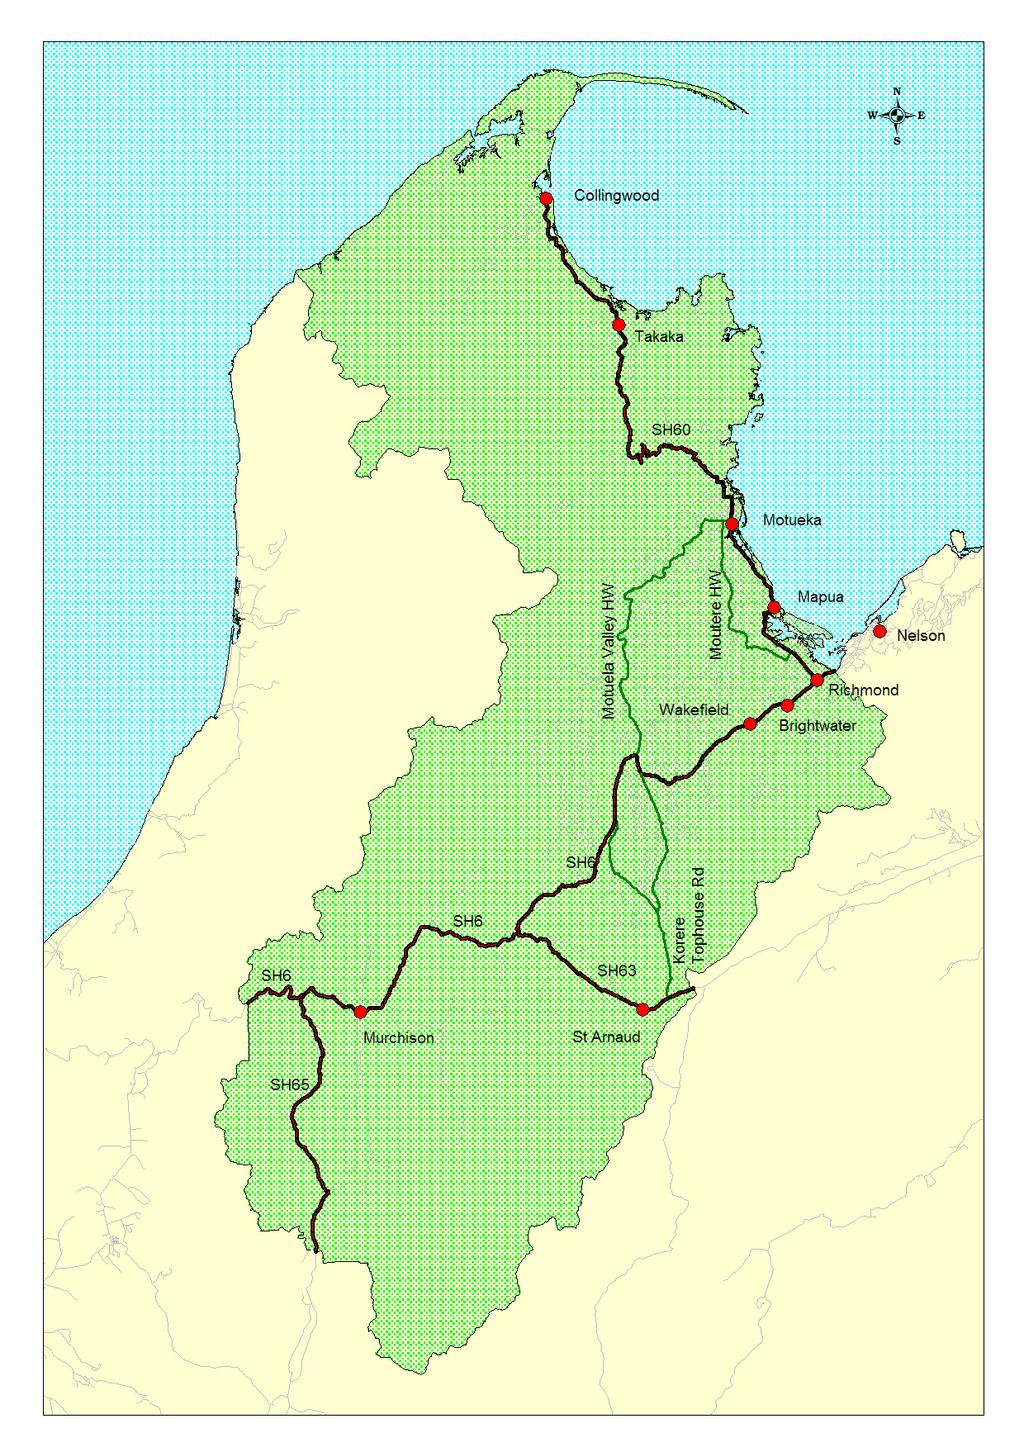 2009-2011/12 short- and medium-term impacts by providing guidance on land transport planning and evaluation processes taking into account the following factors: the government s priority to support